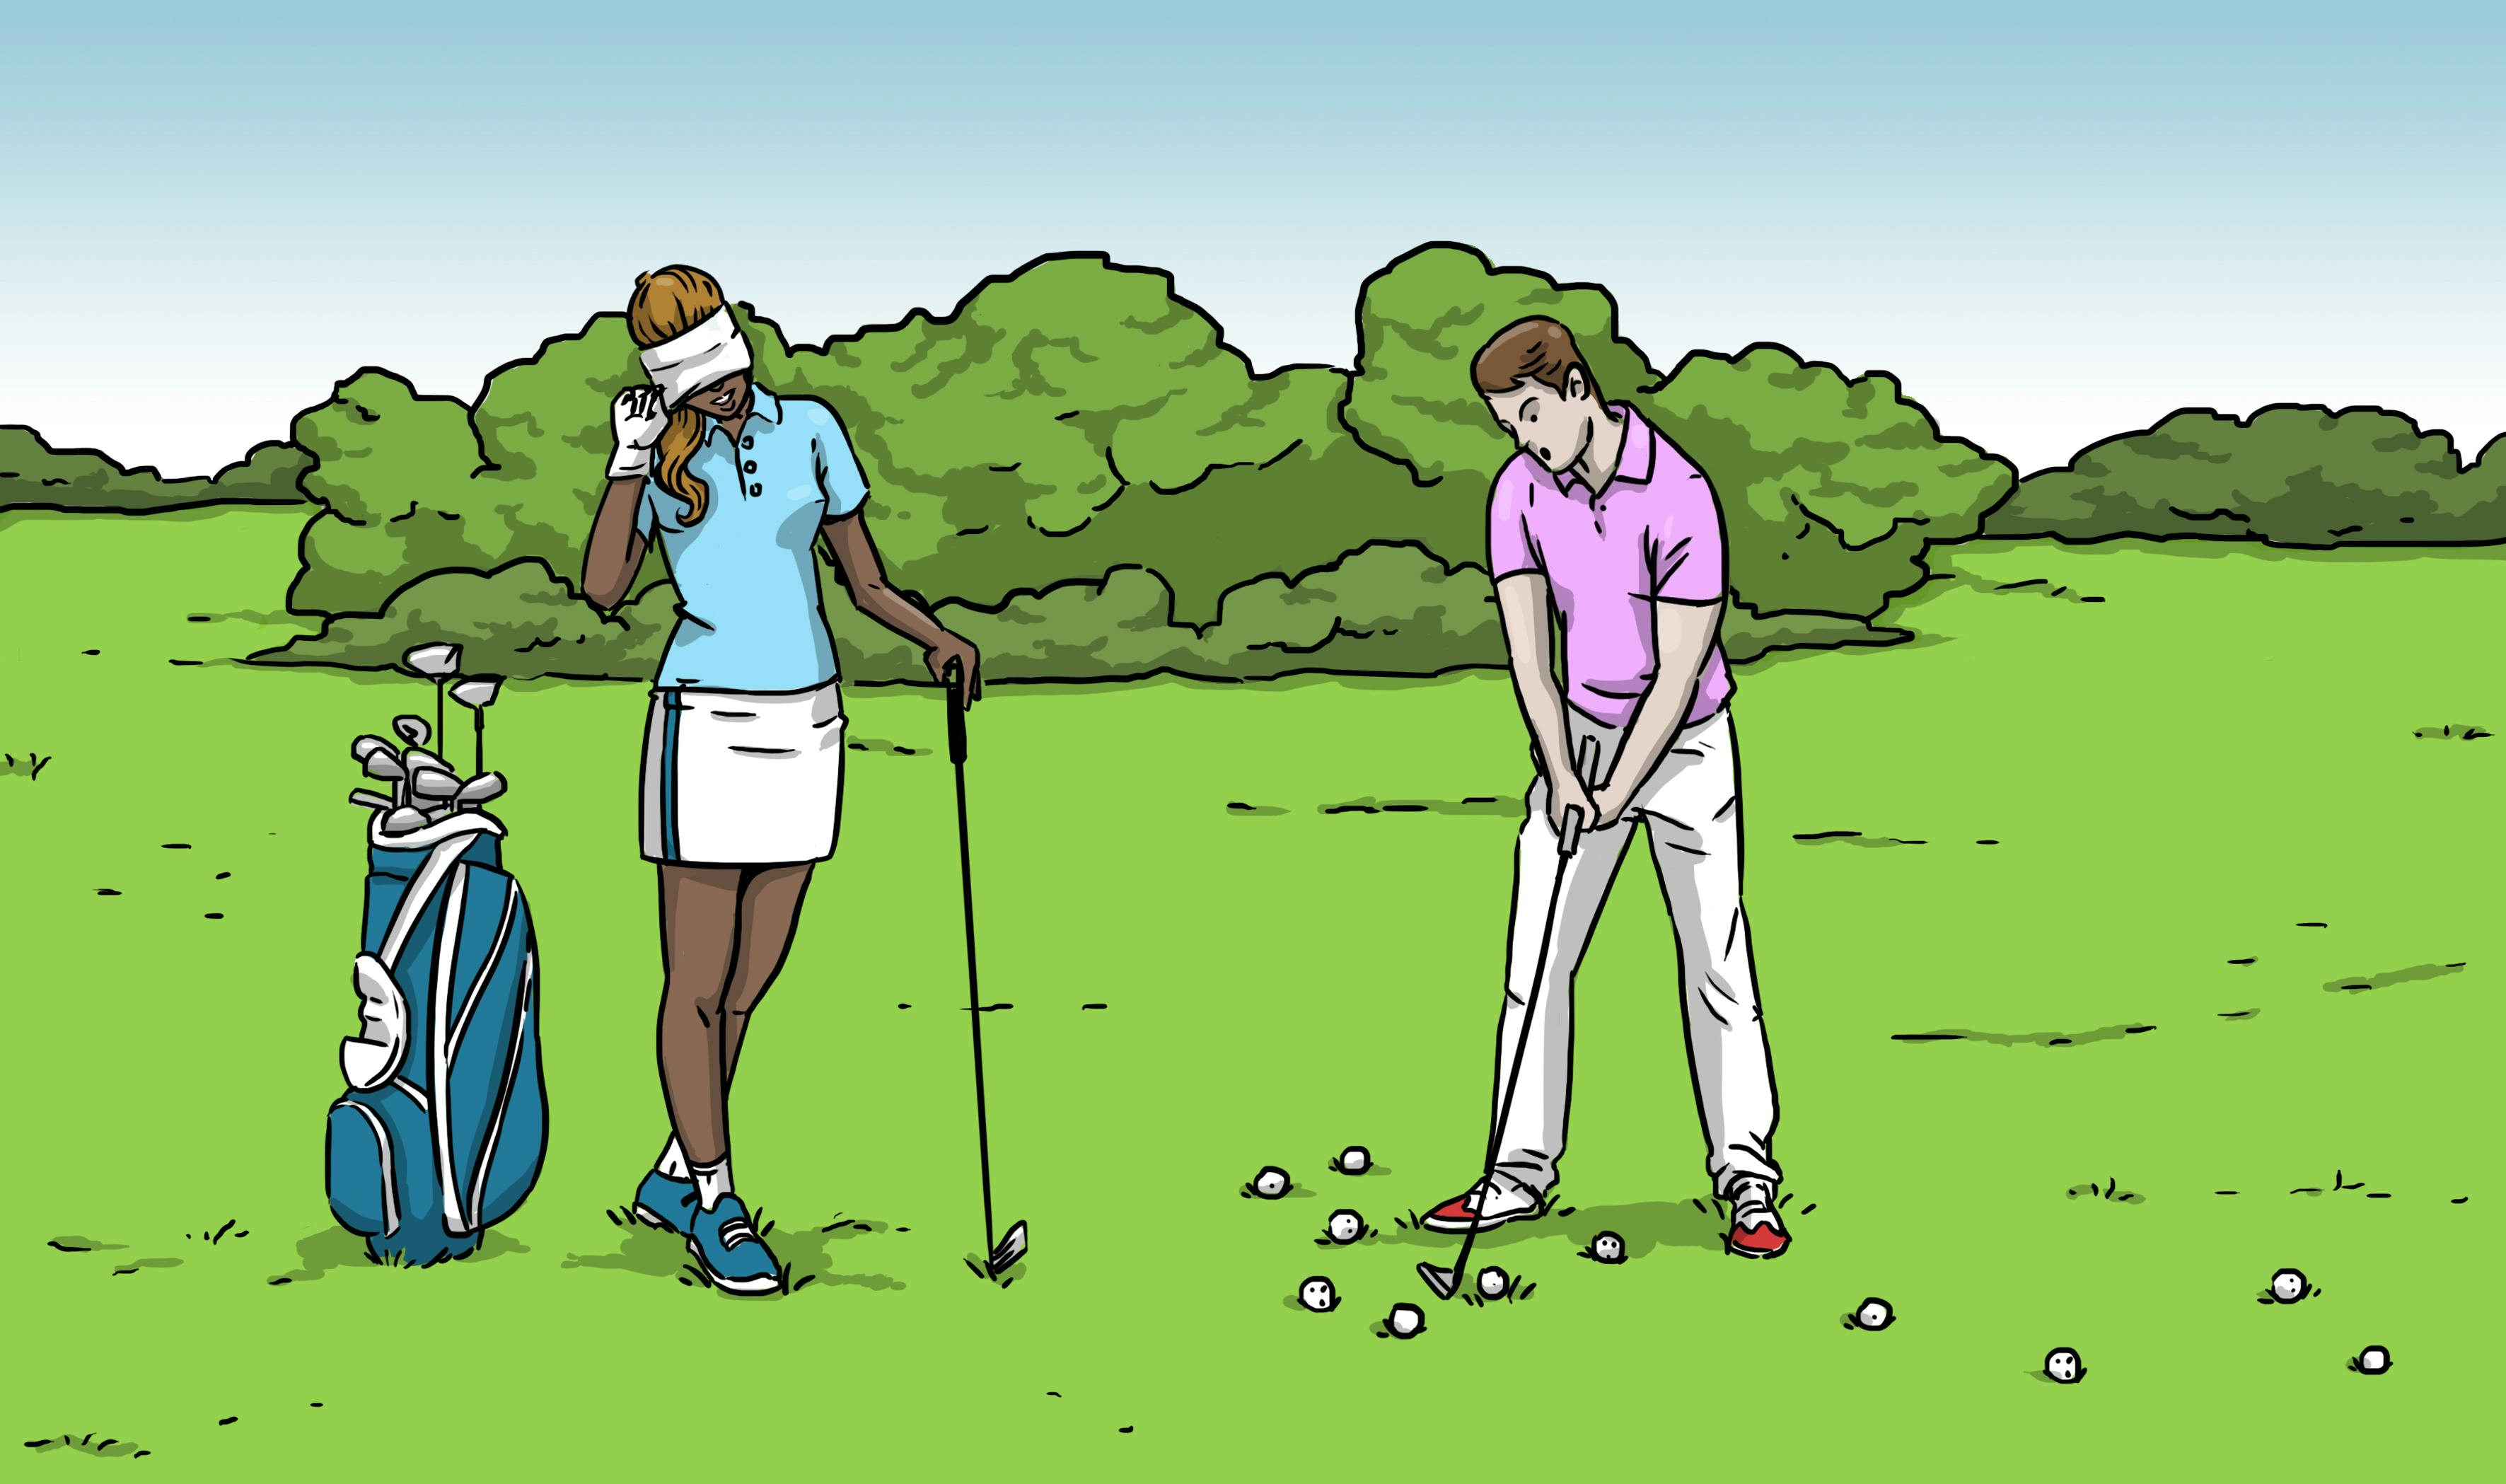 A golf instructor imparts expert tips to improve your game.